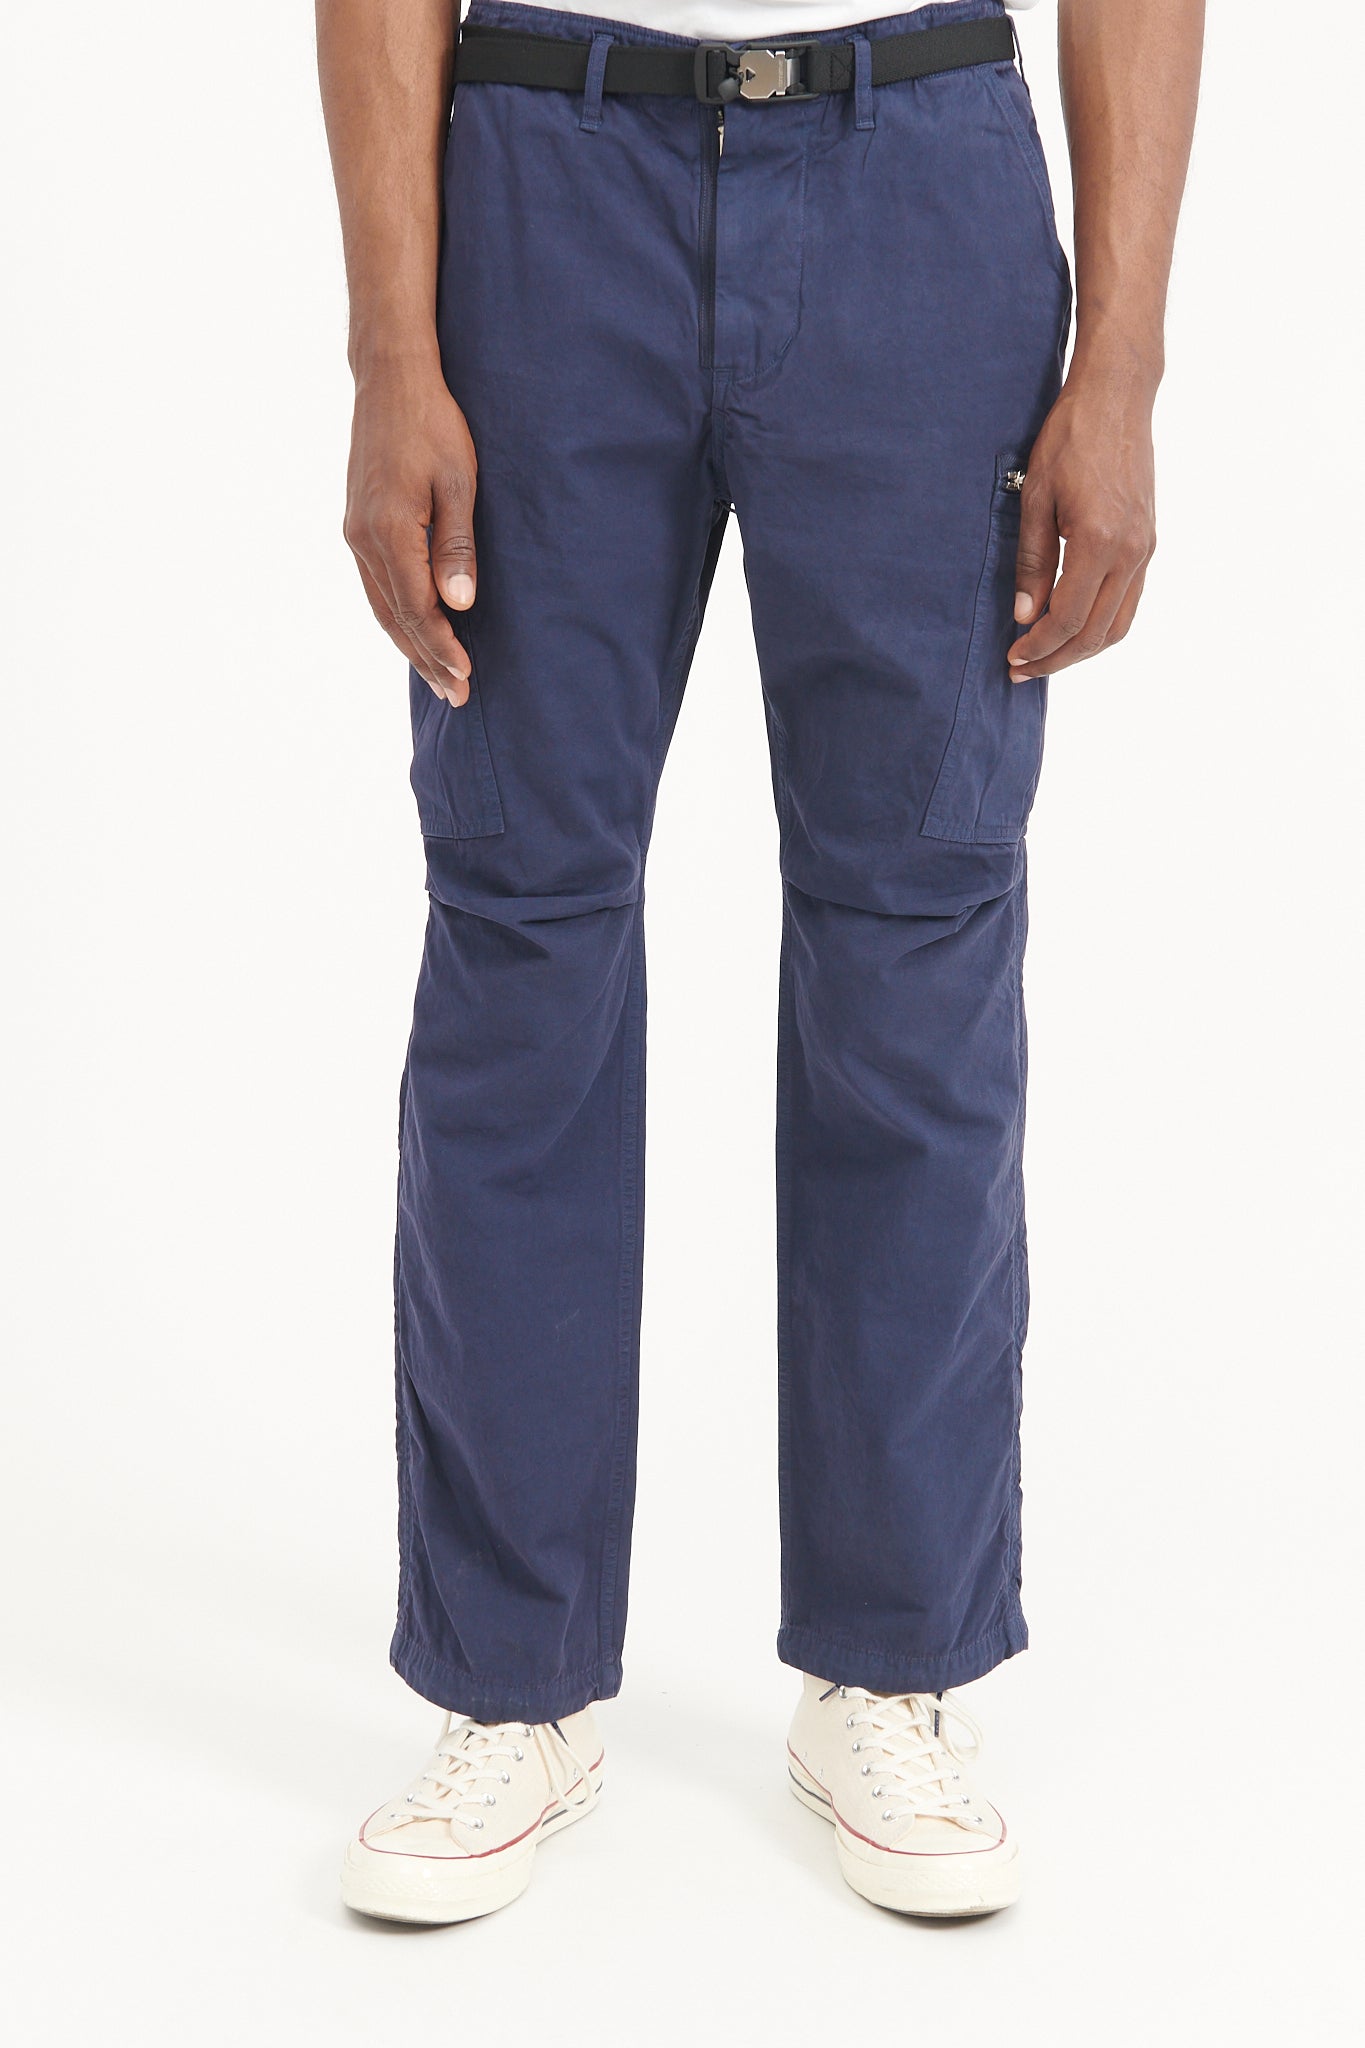 Trooper 6P Trousers Cotton Weather Cloth Overdyed - Navy